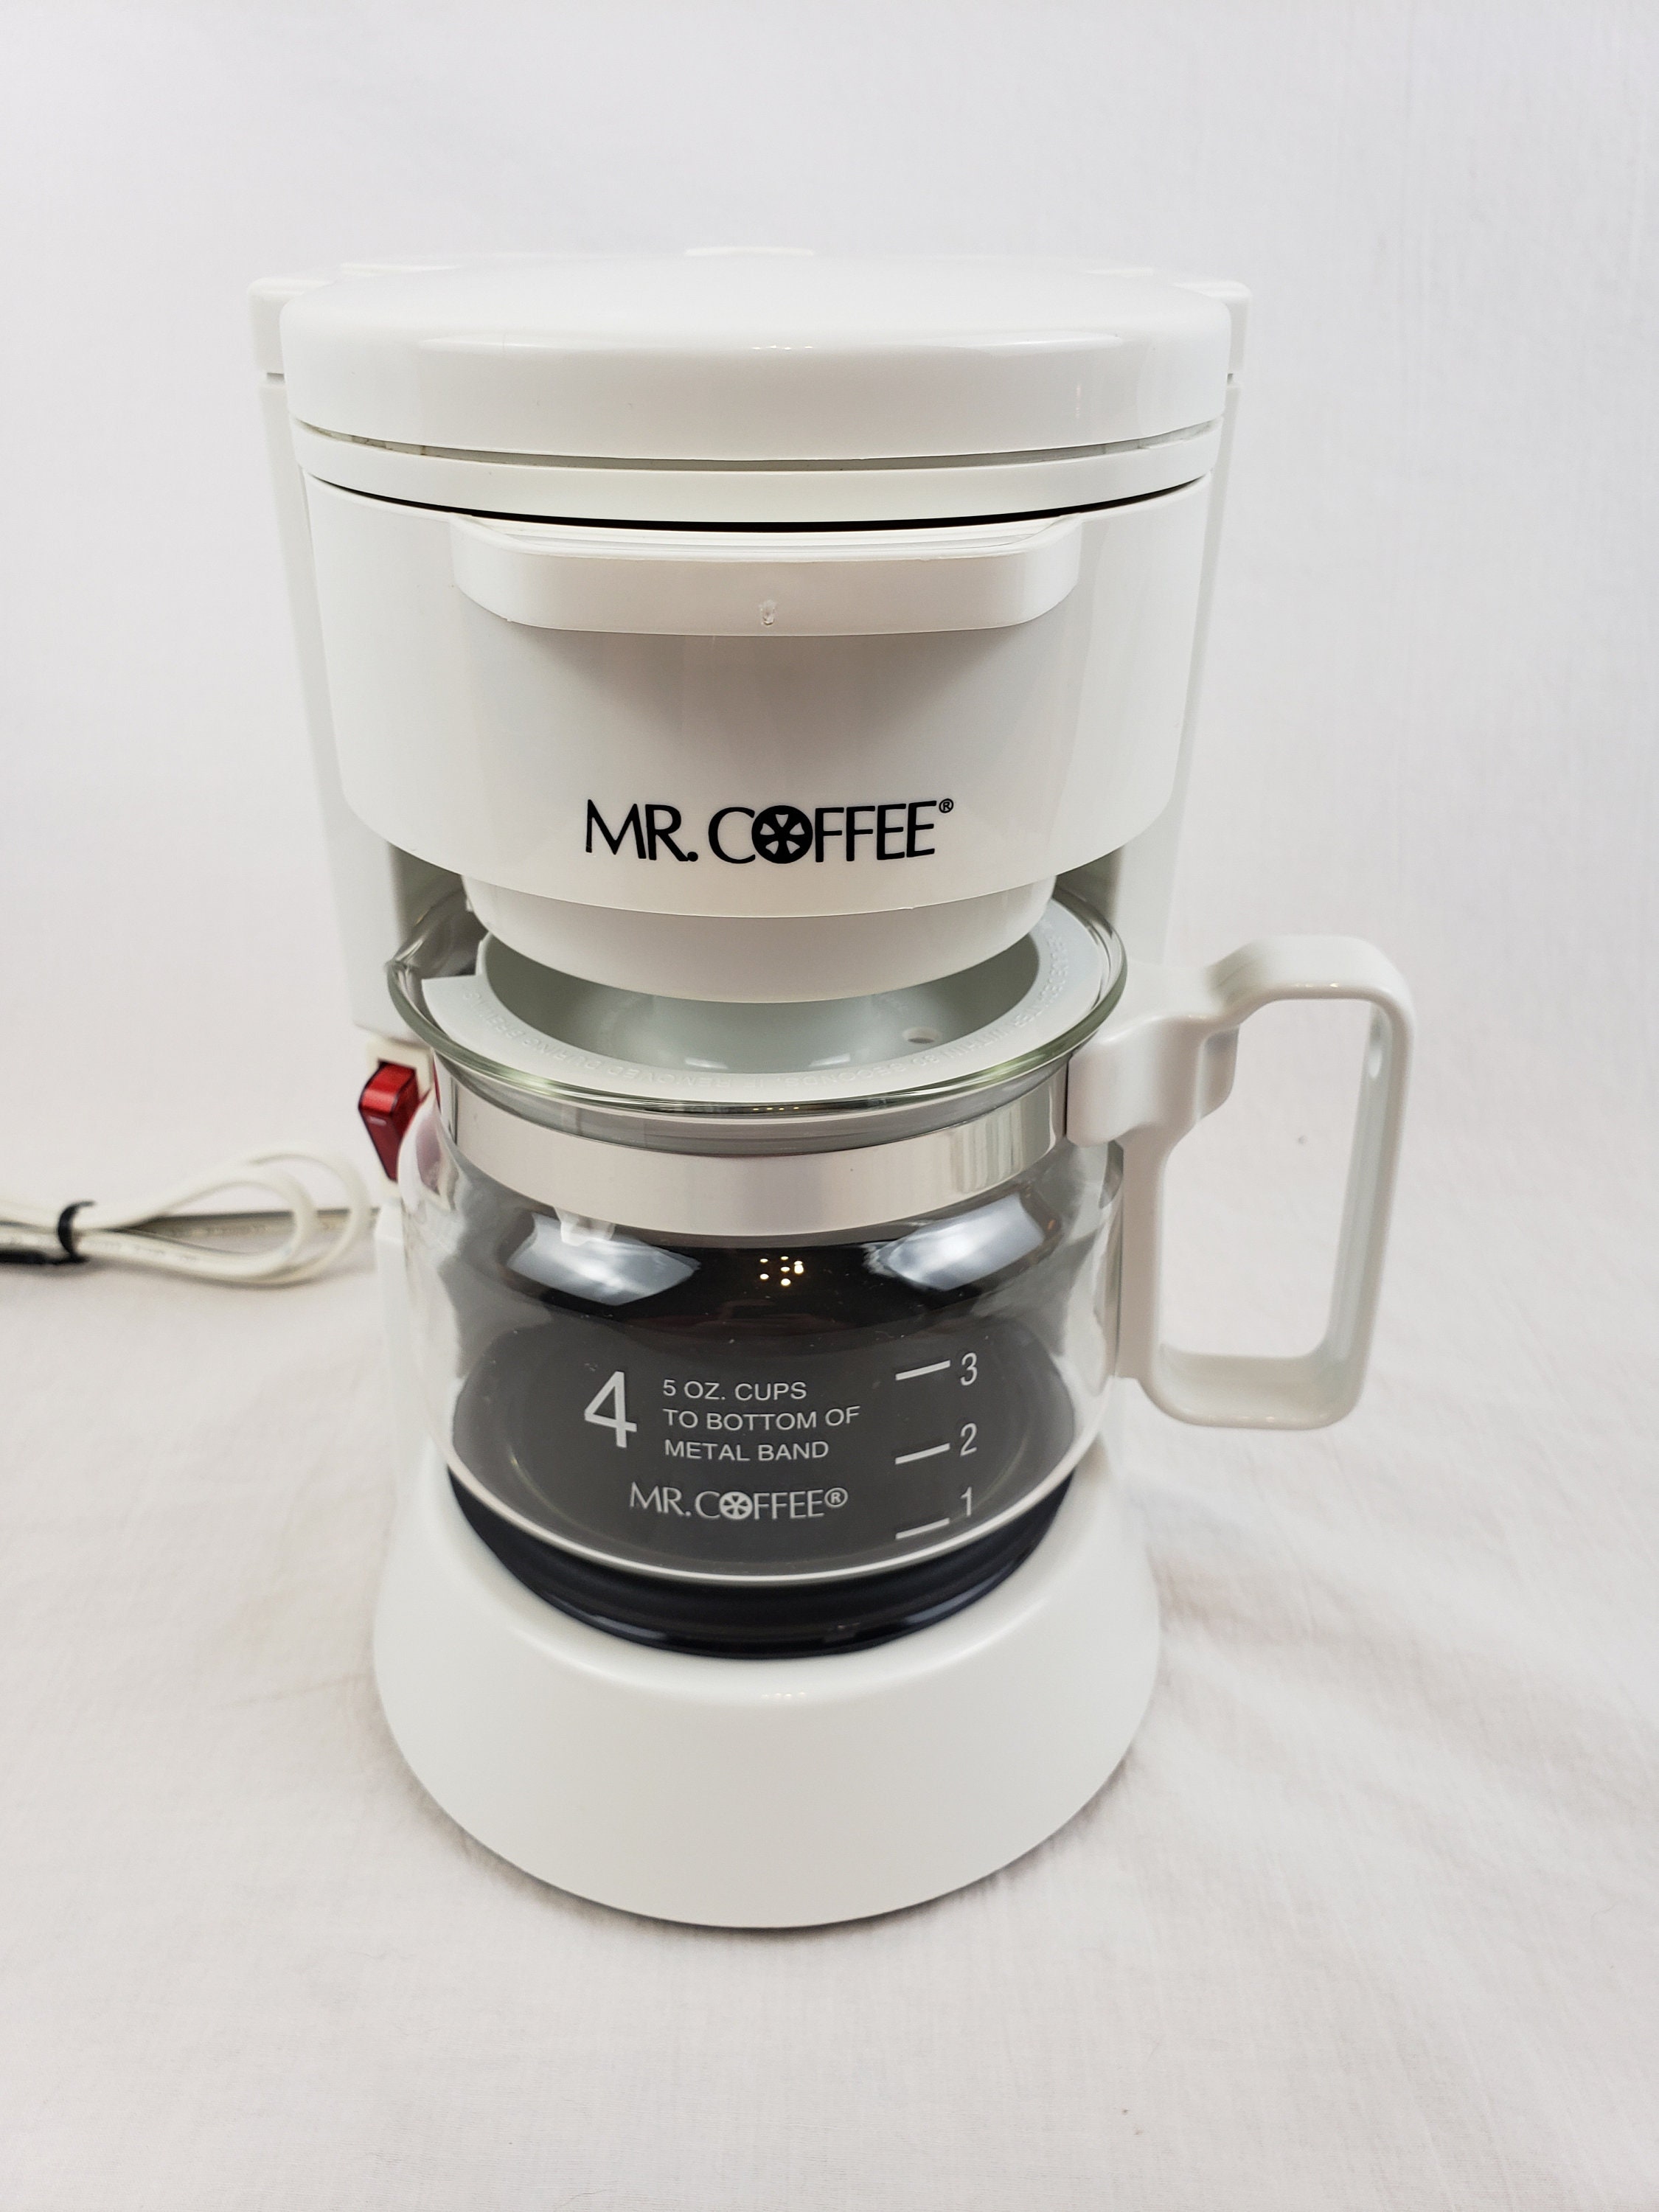 Mr. Coffee IDS55-4 Coffee Grinder, White - For Moms